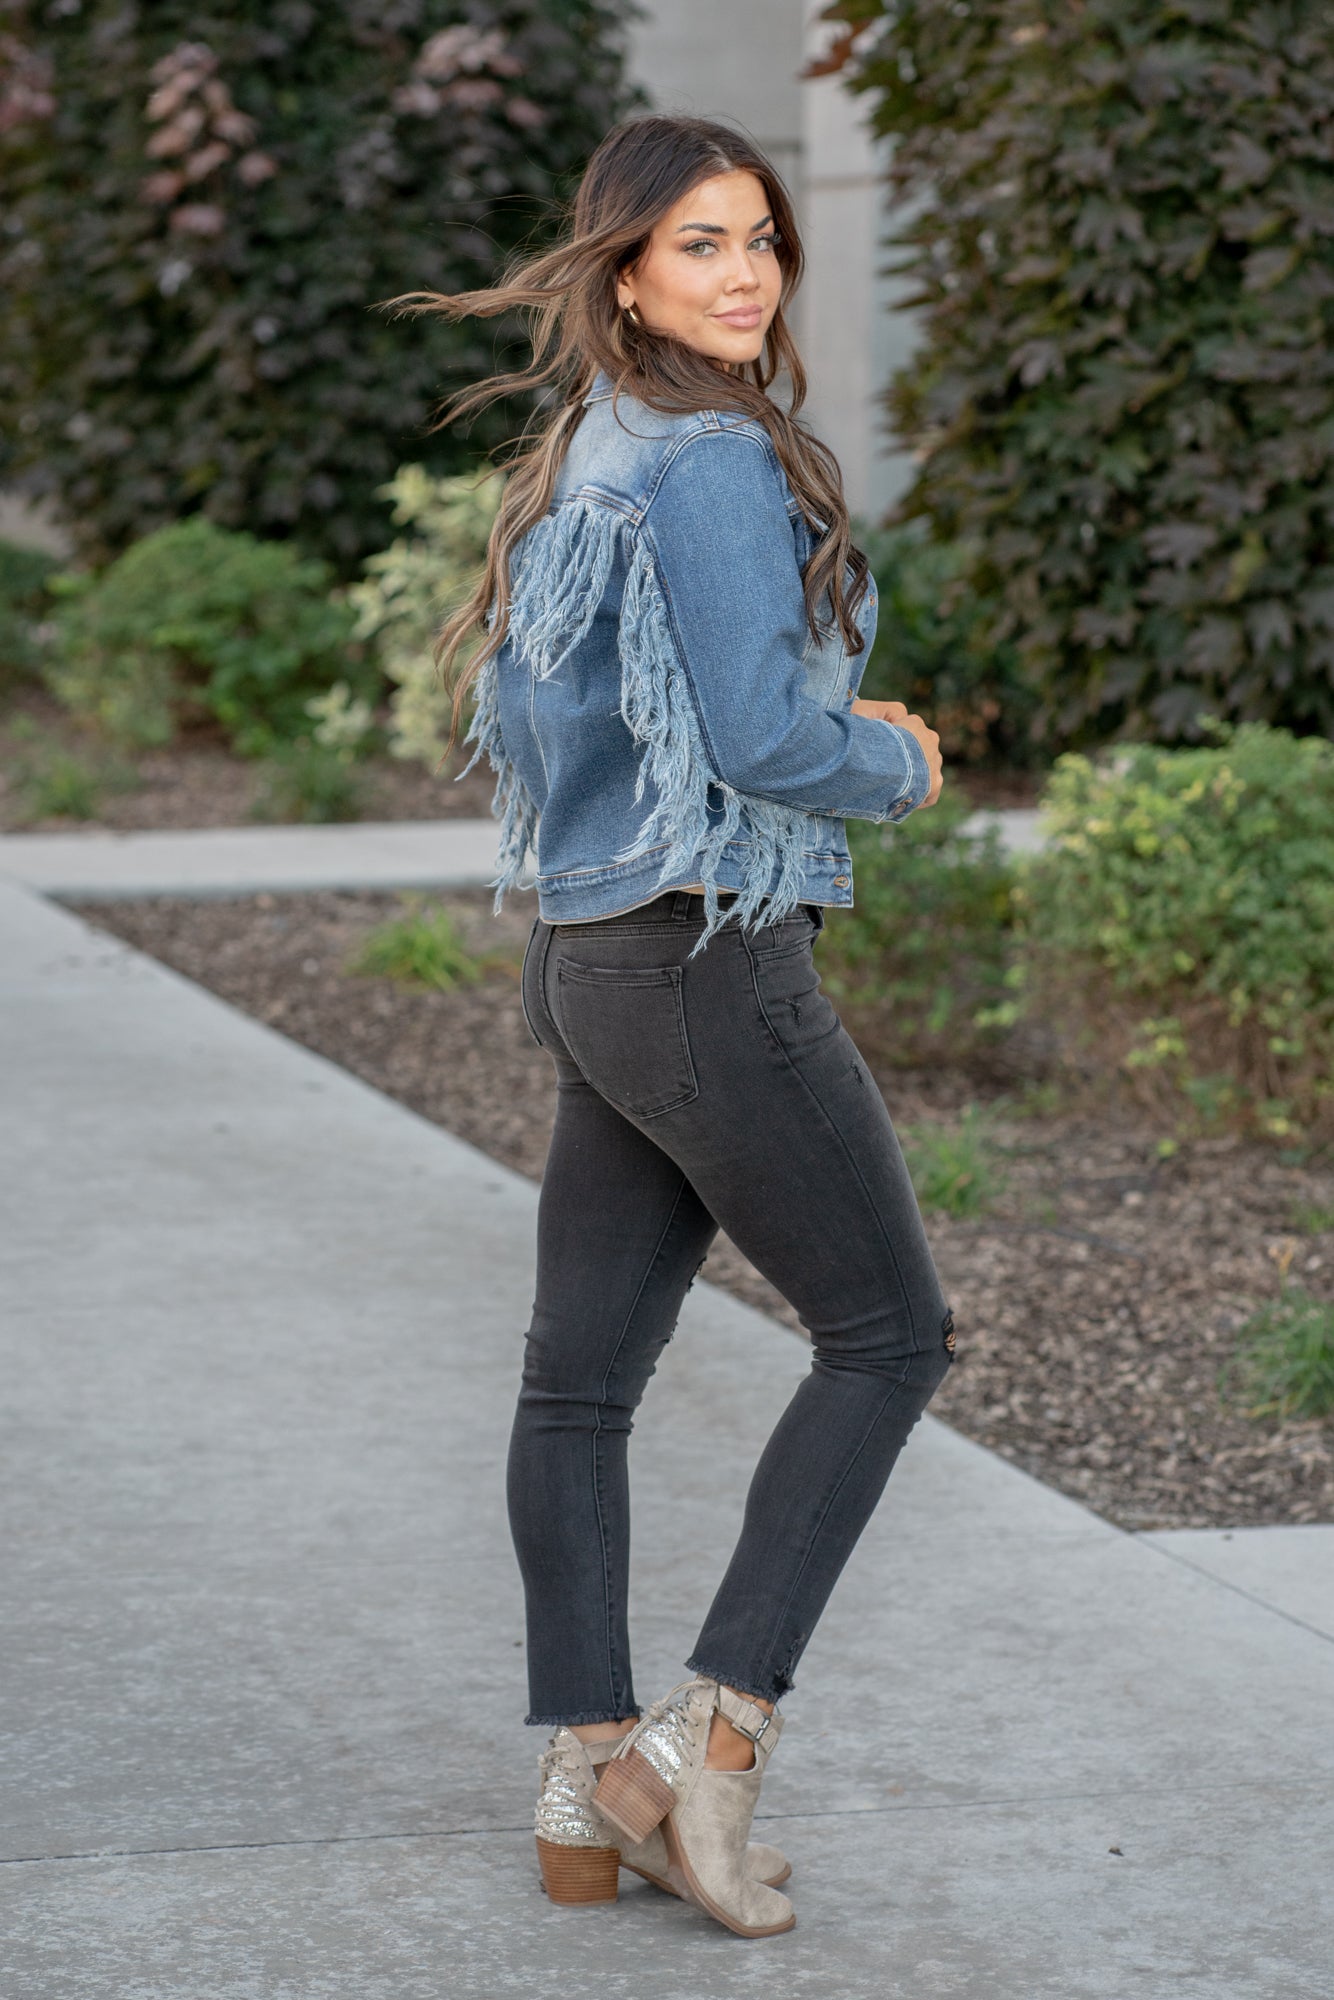 Denim jacket with black top on Stylevore